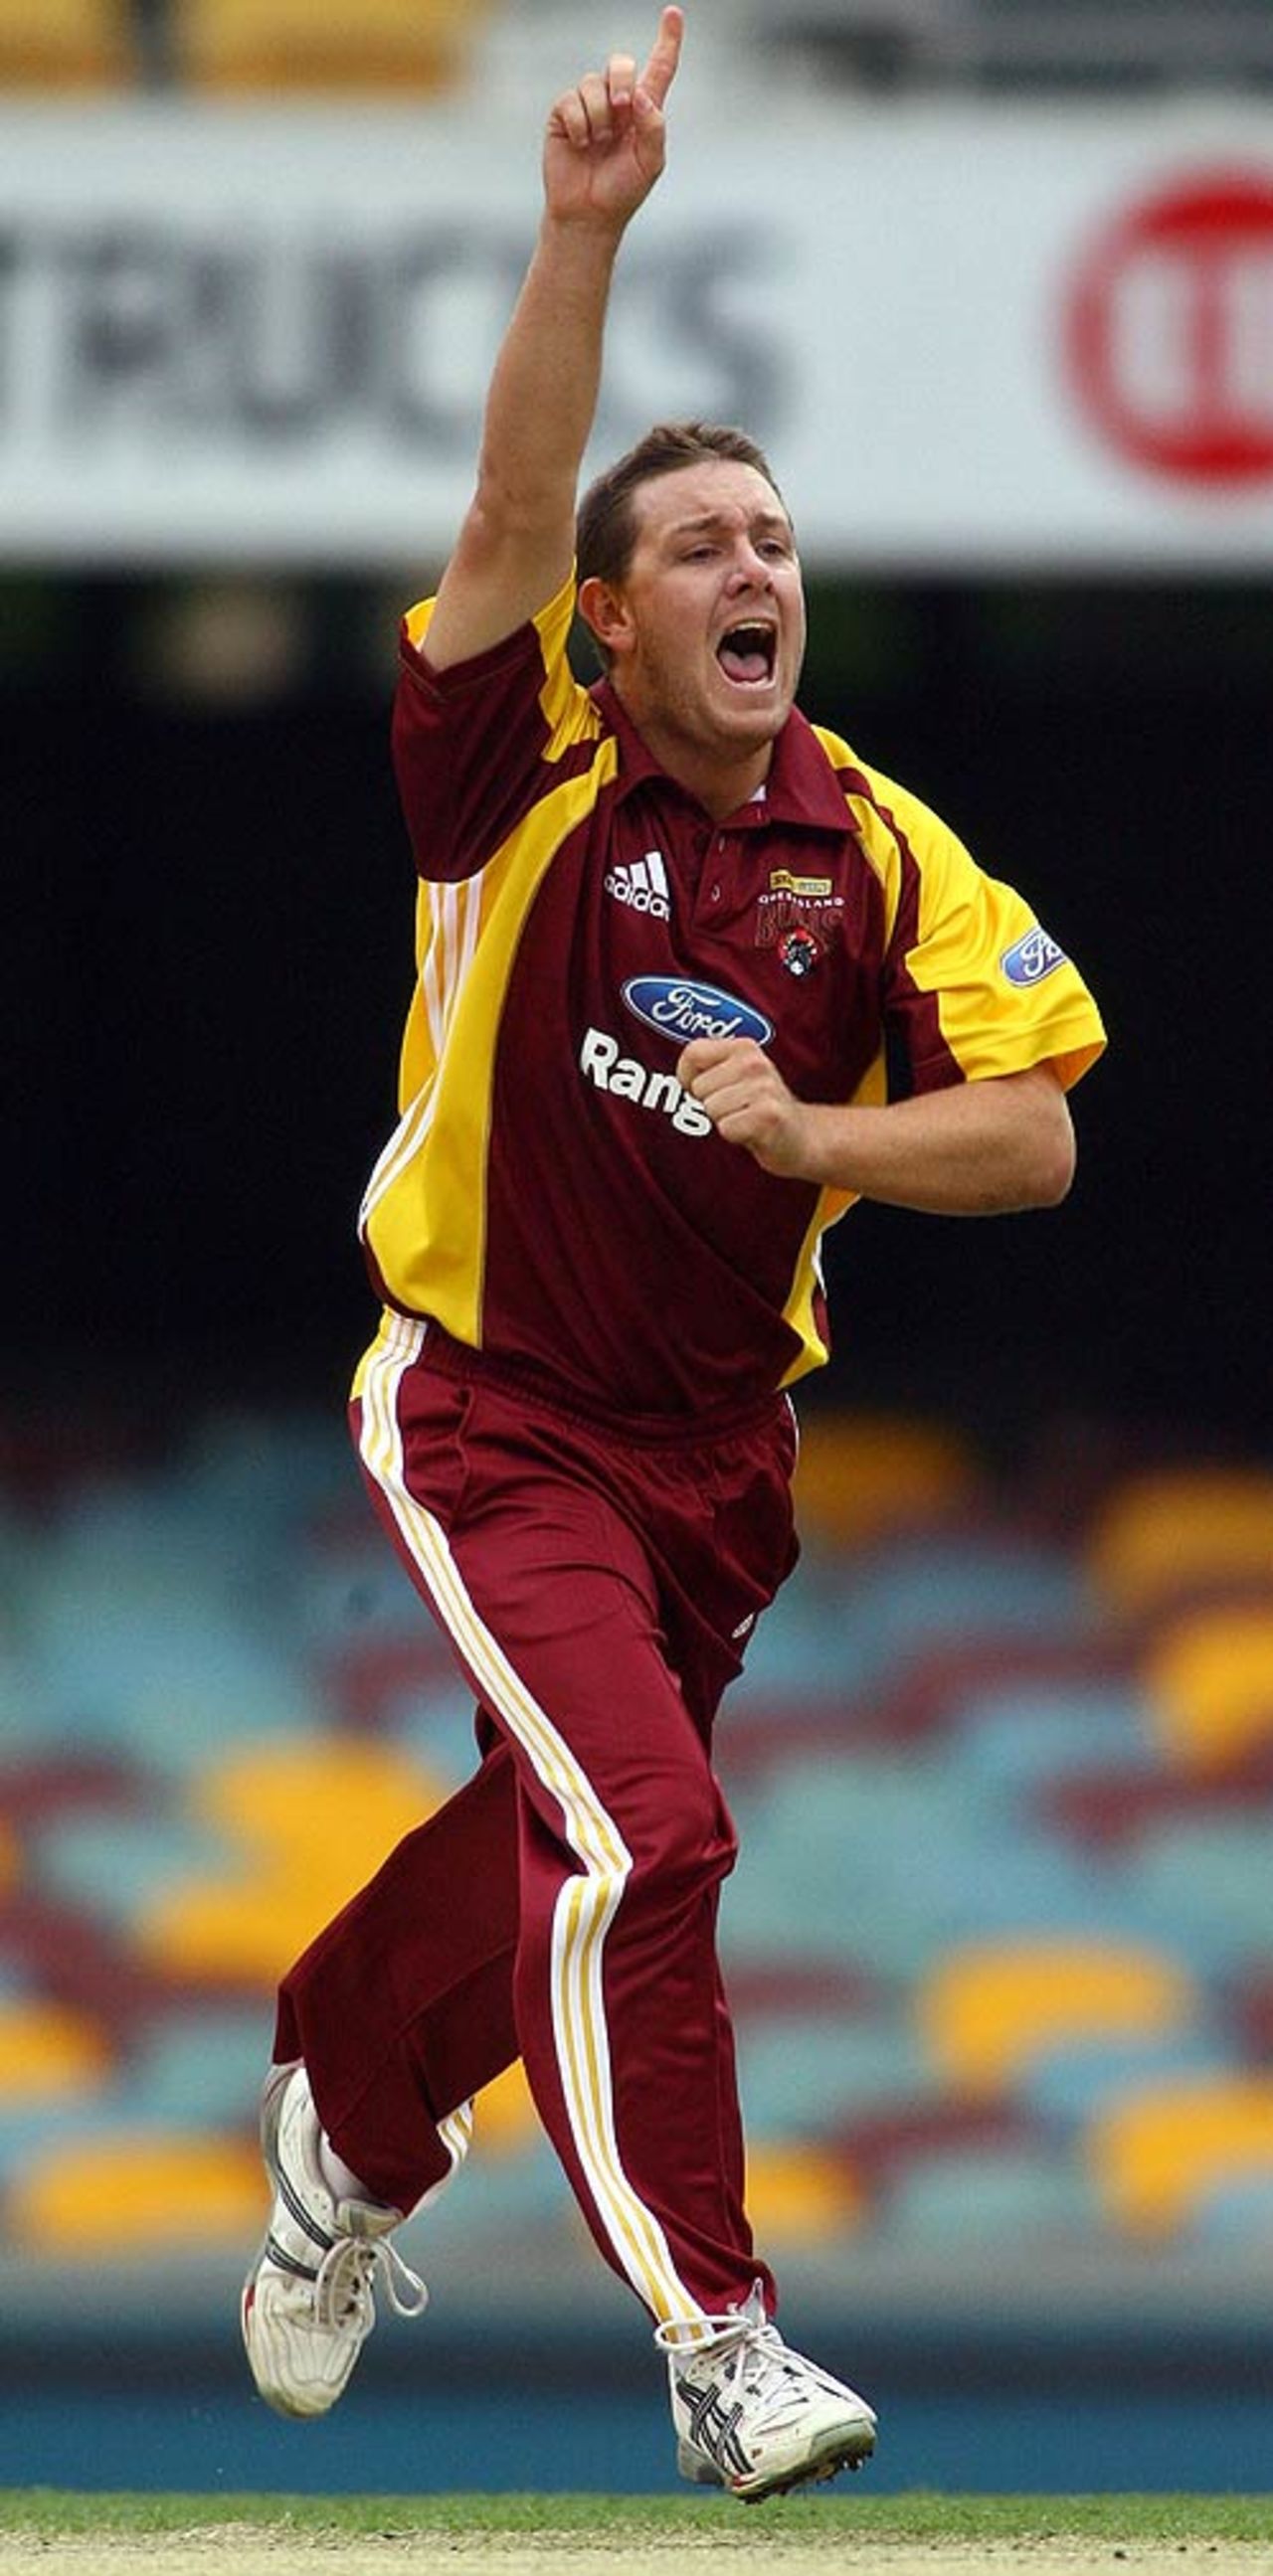 Craig Philipson celebrates taking a wicket with his first ball, Queensland v Tasmania, FR Cup, Brisbane, October 10, 2007